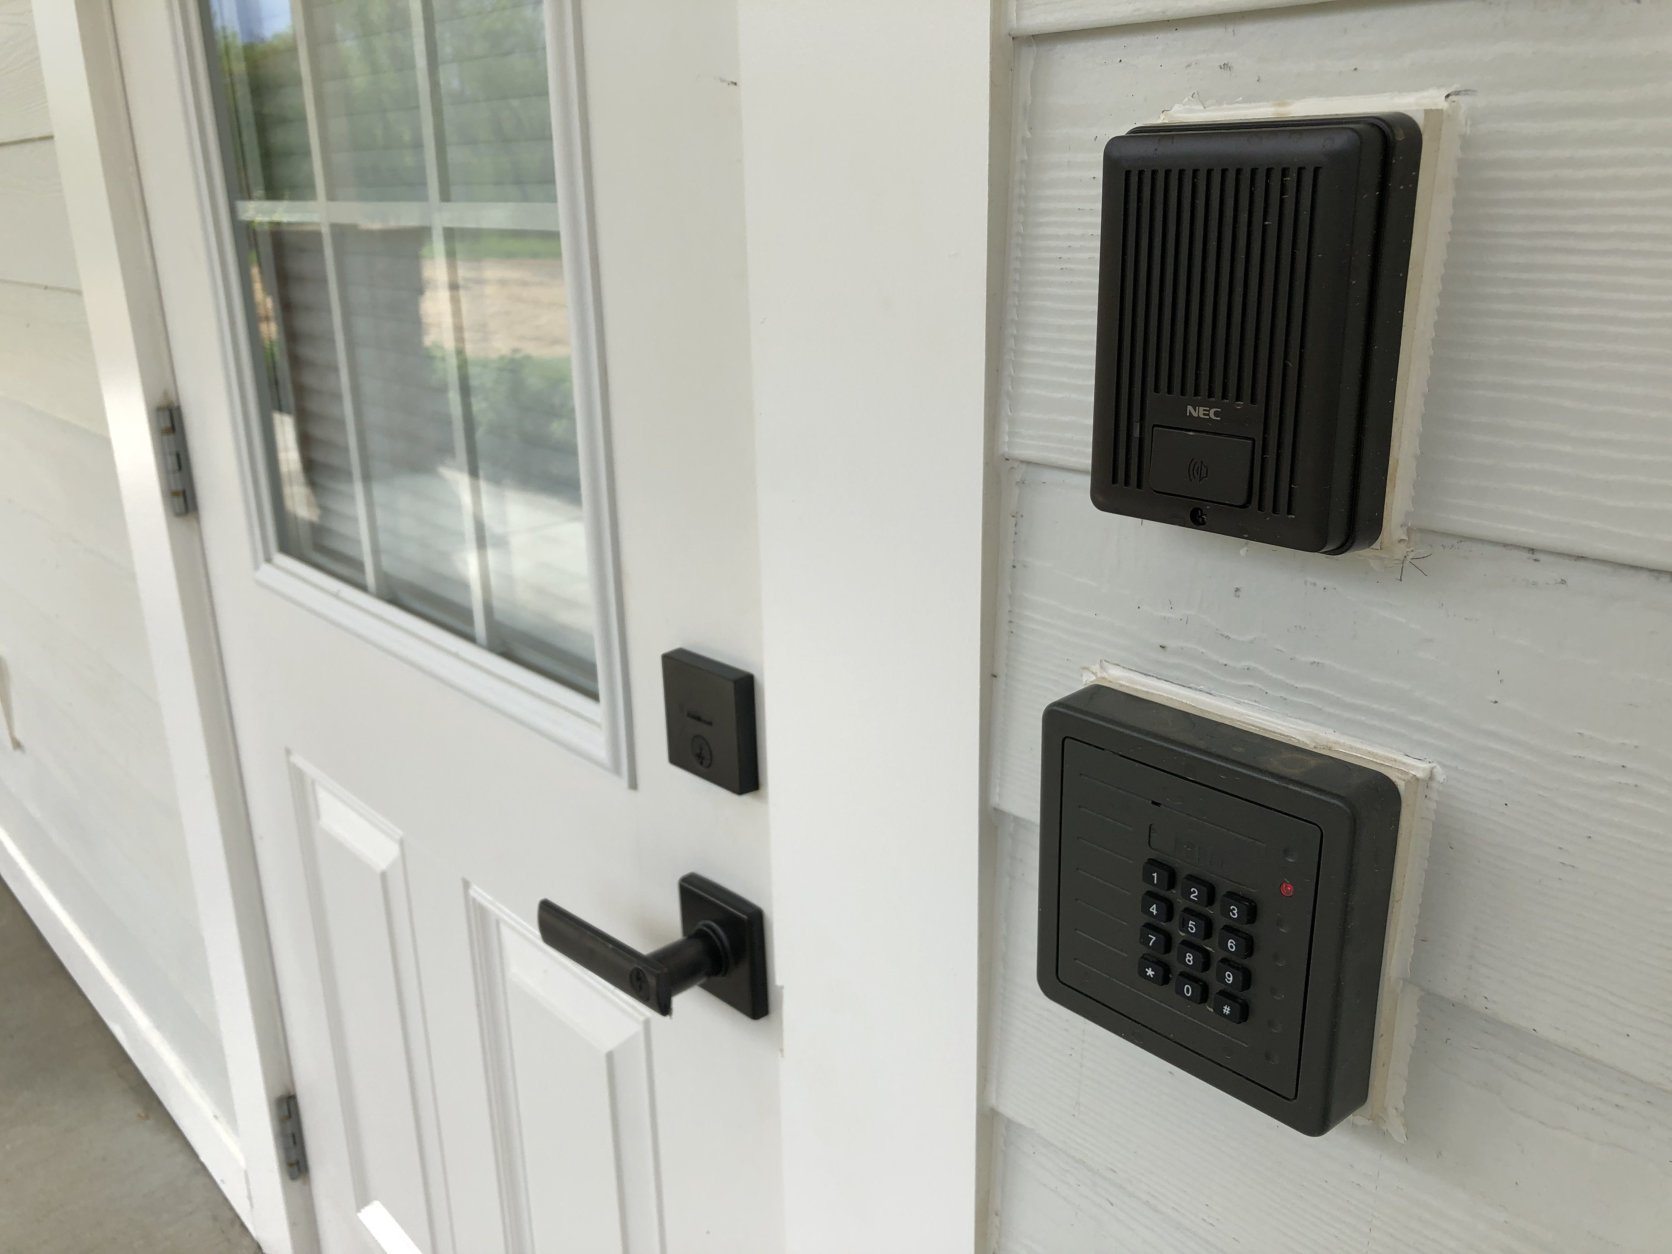 Accessibility-focused features including lower door handles will make it more convenient for people in or out of wheelchairs to navigate the home. (WTOP/Neal Augenstein)